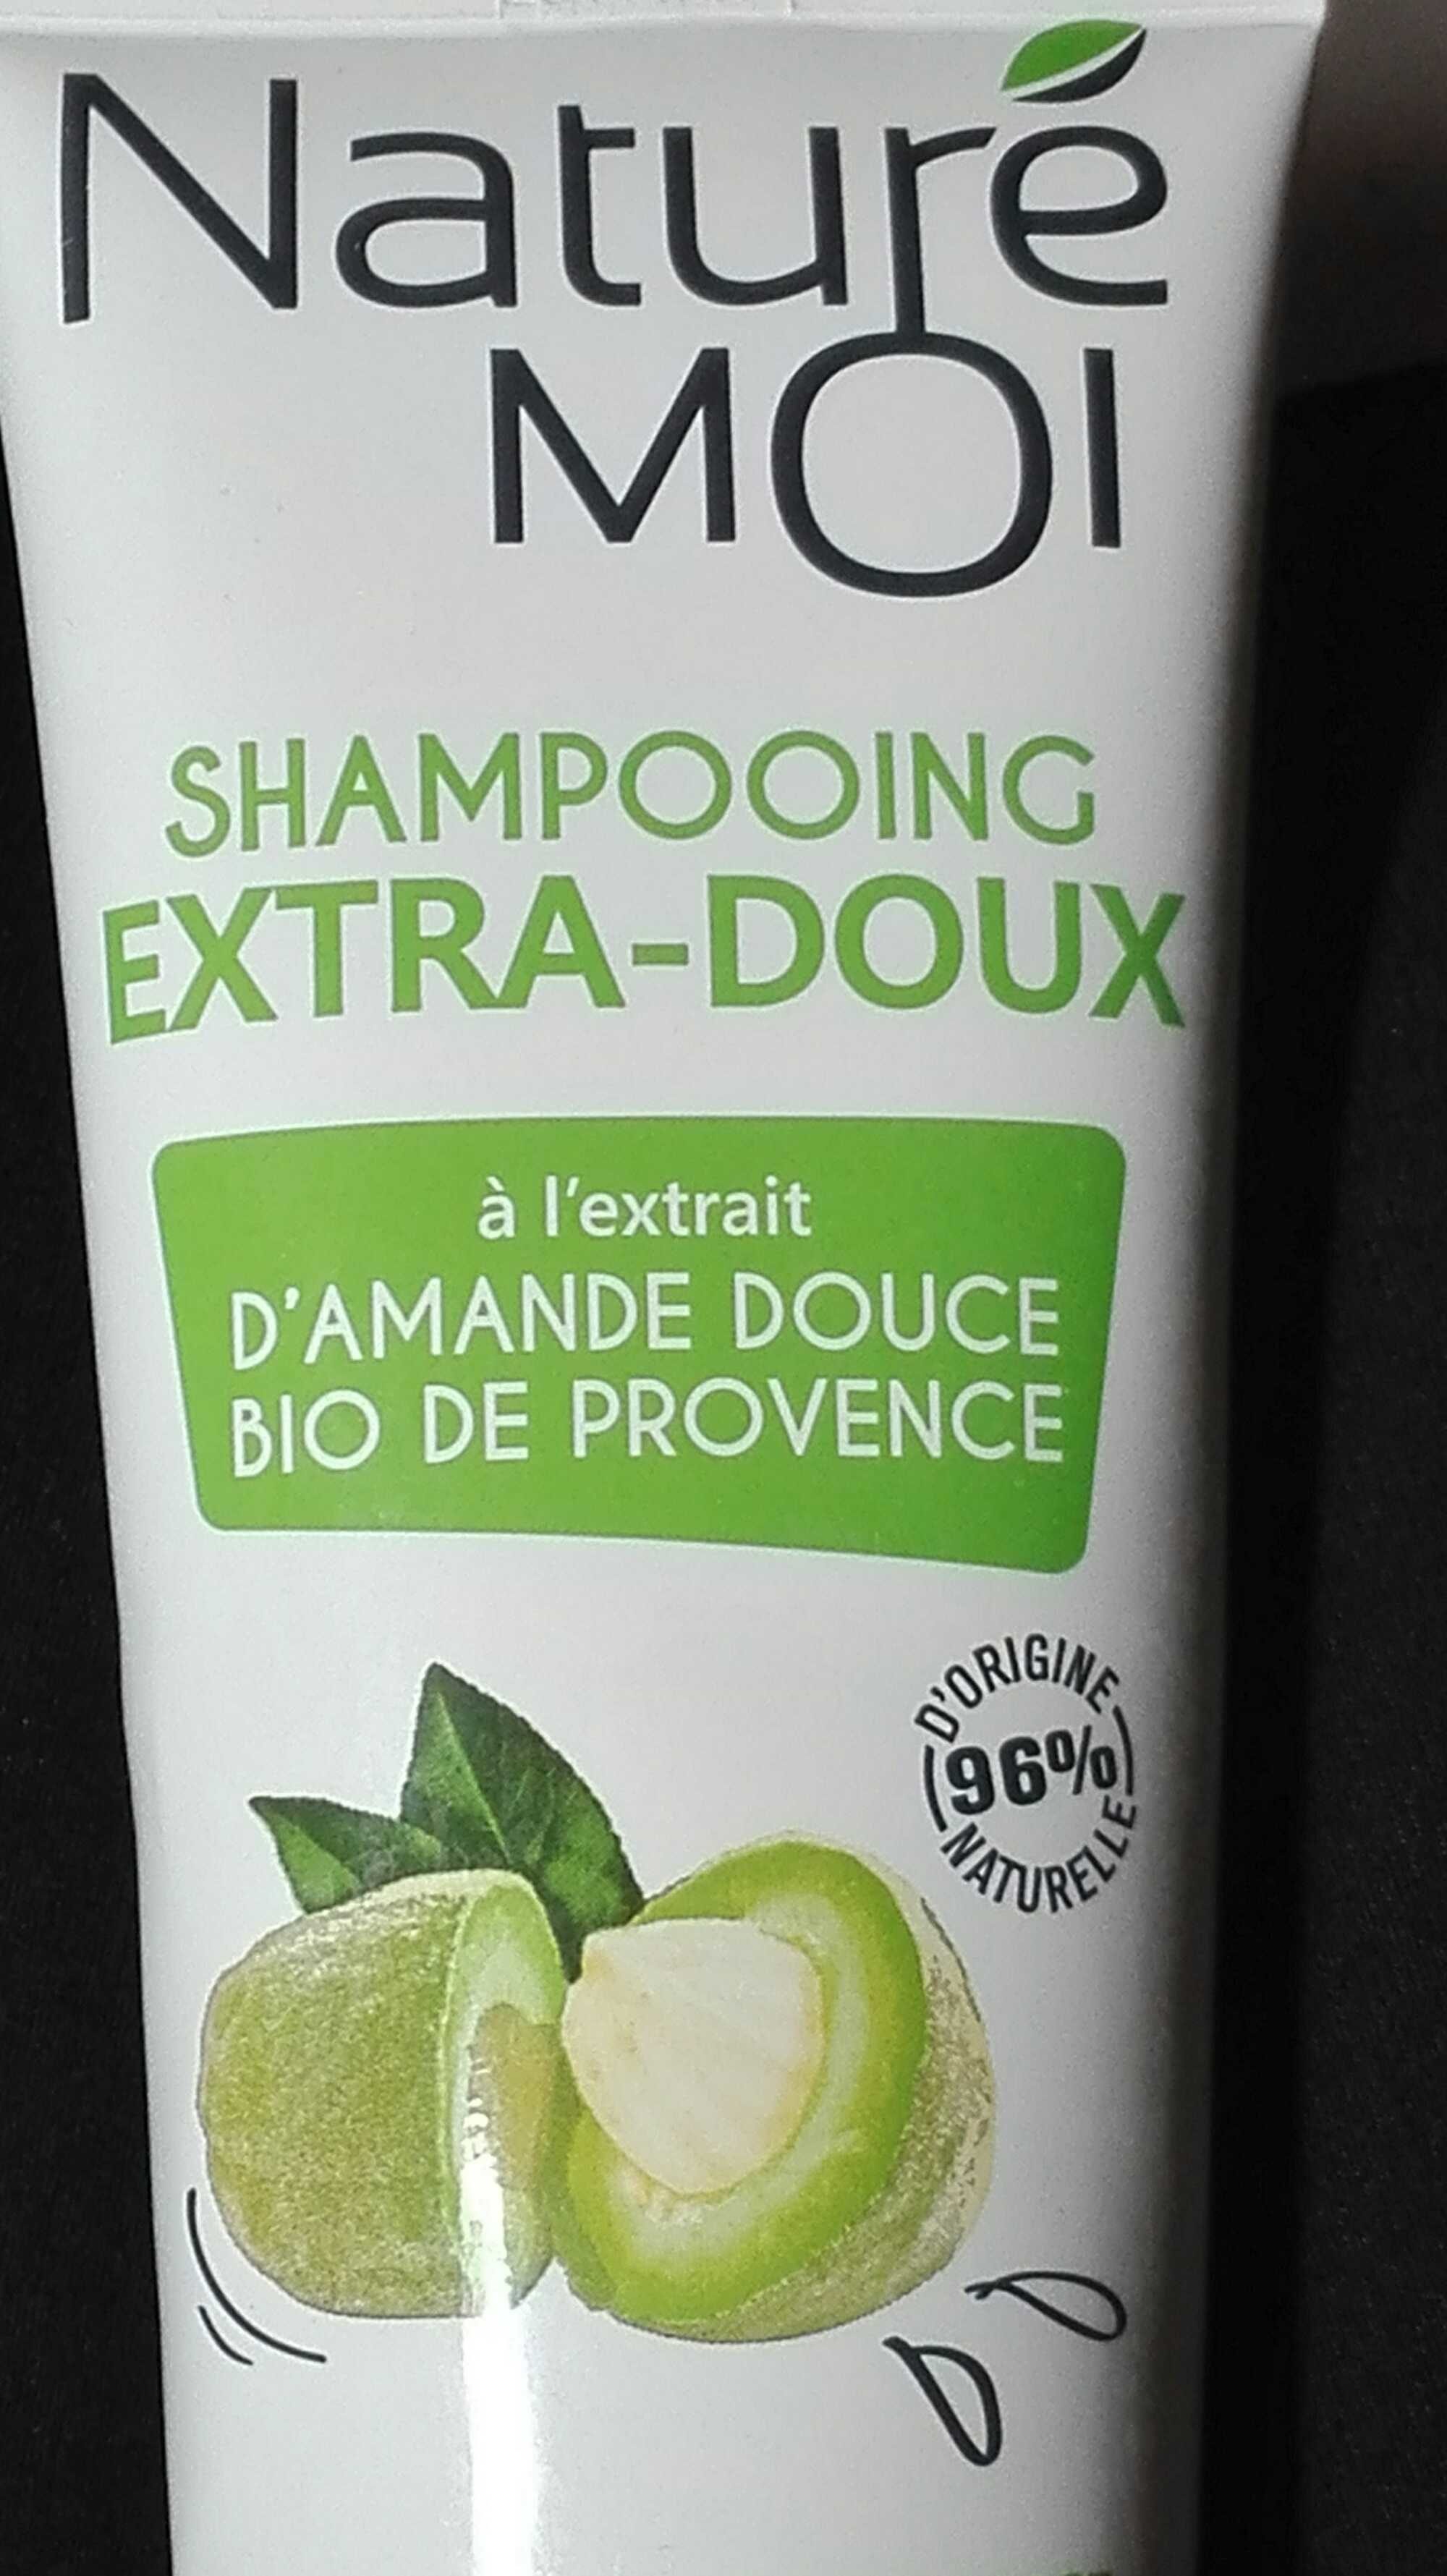 Shampooing Extra-doux - Product - fr